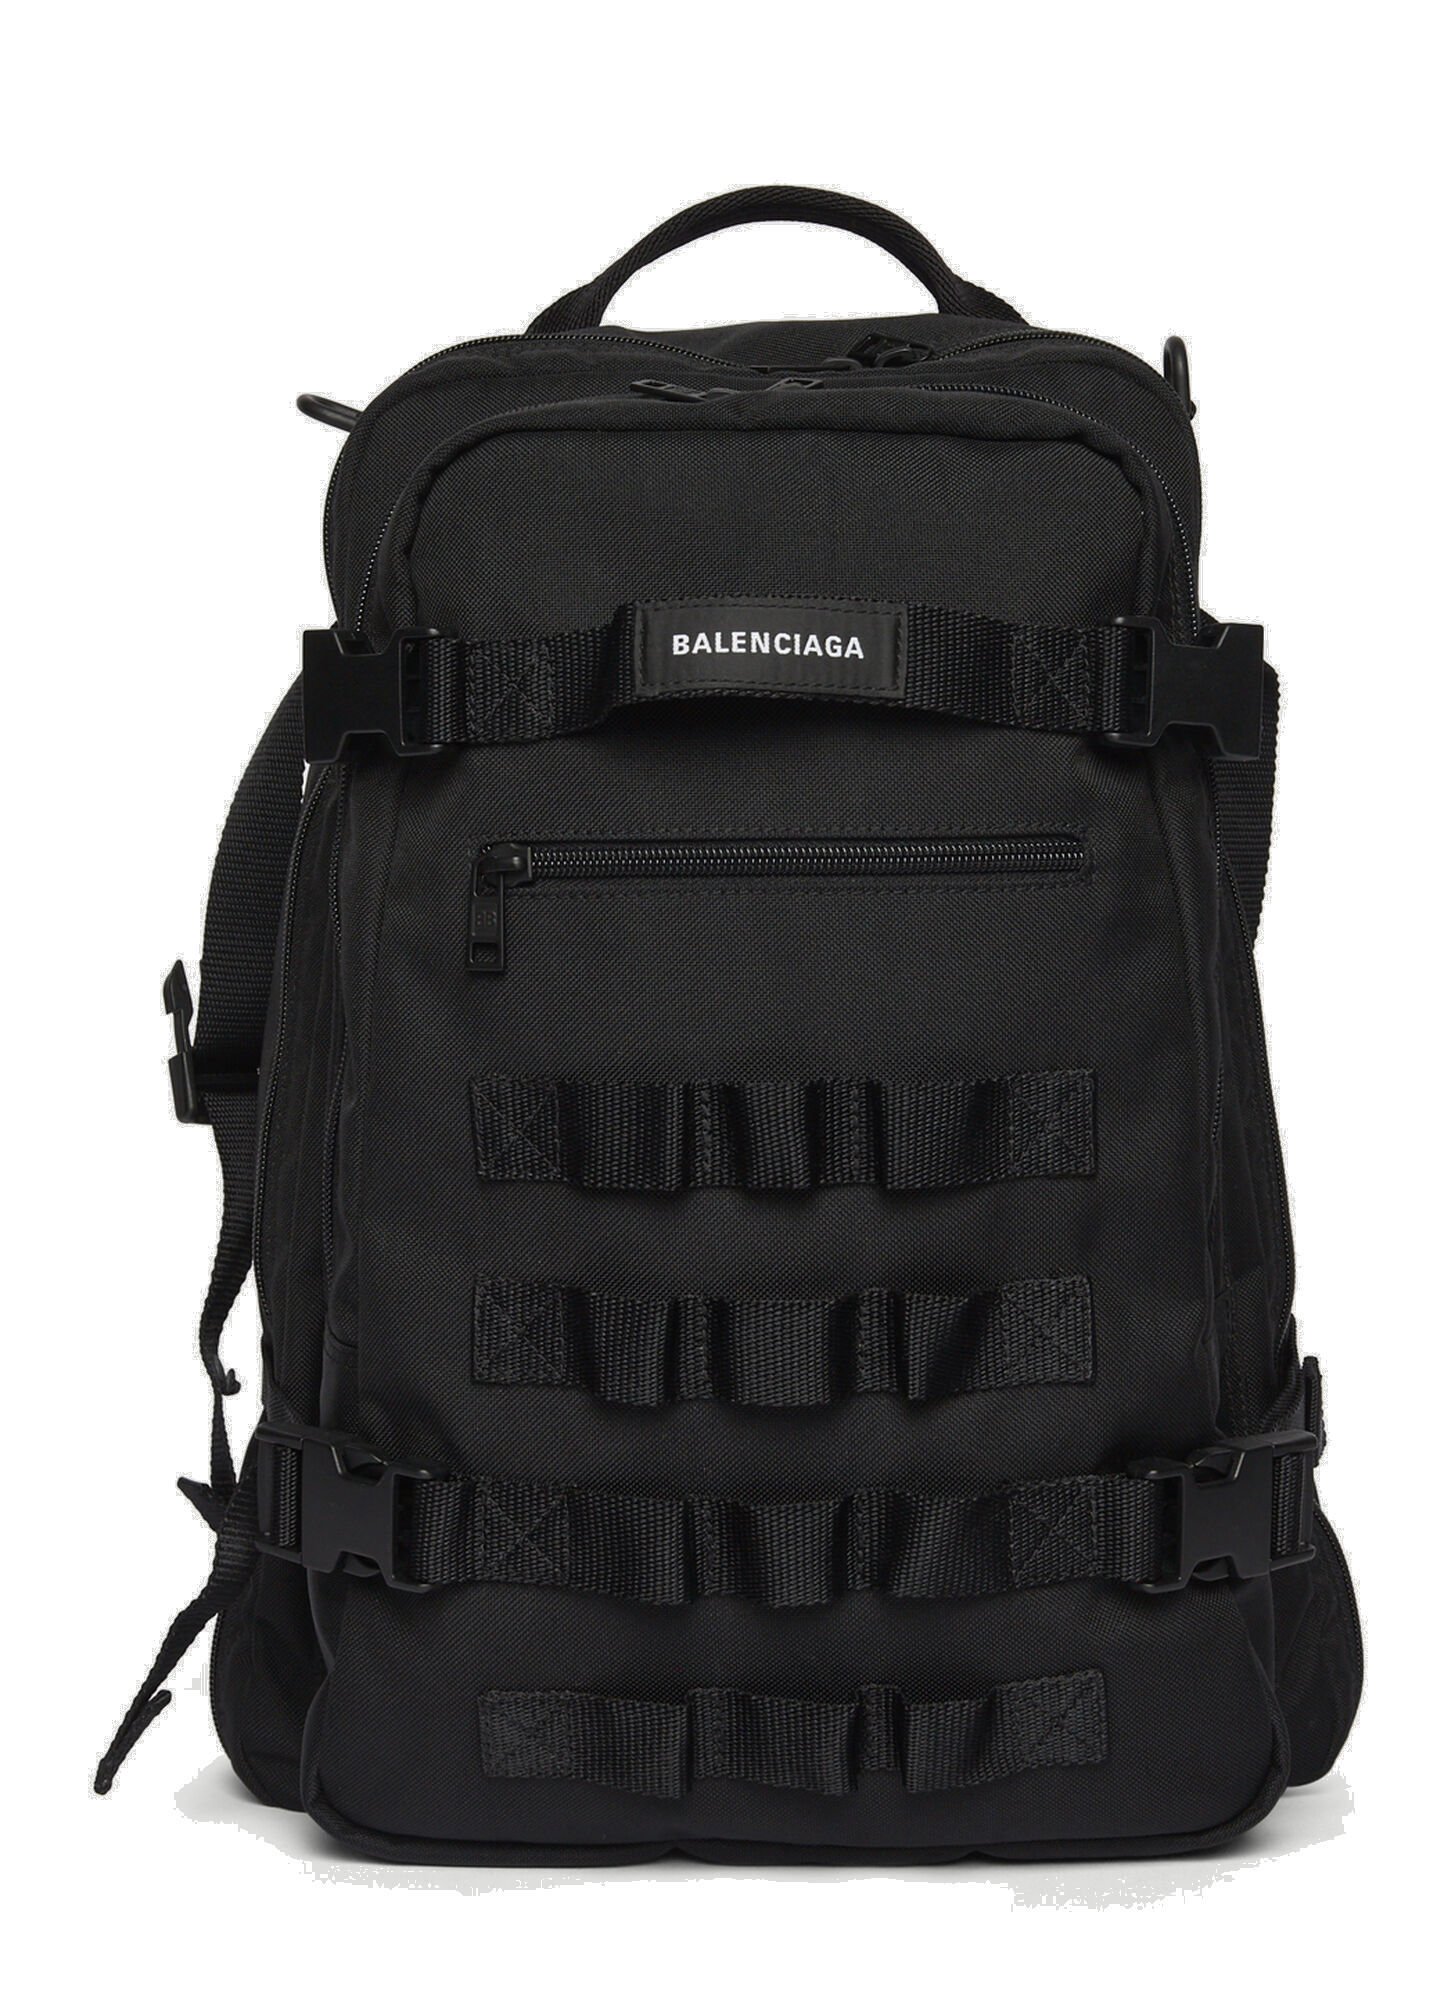 Army Space Small Backpack in Black Balenciaga